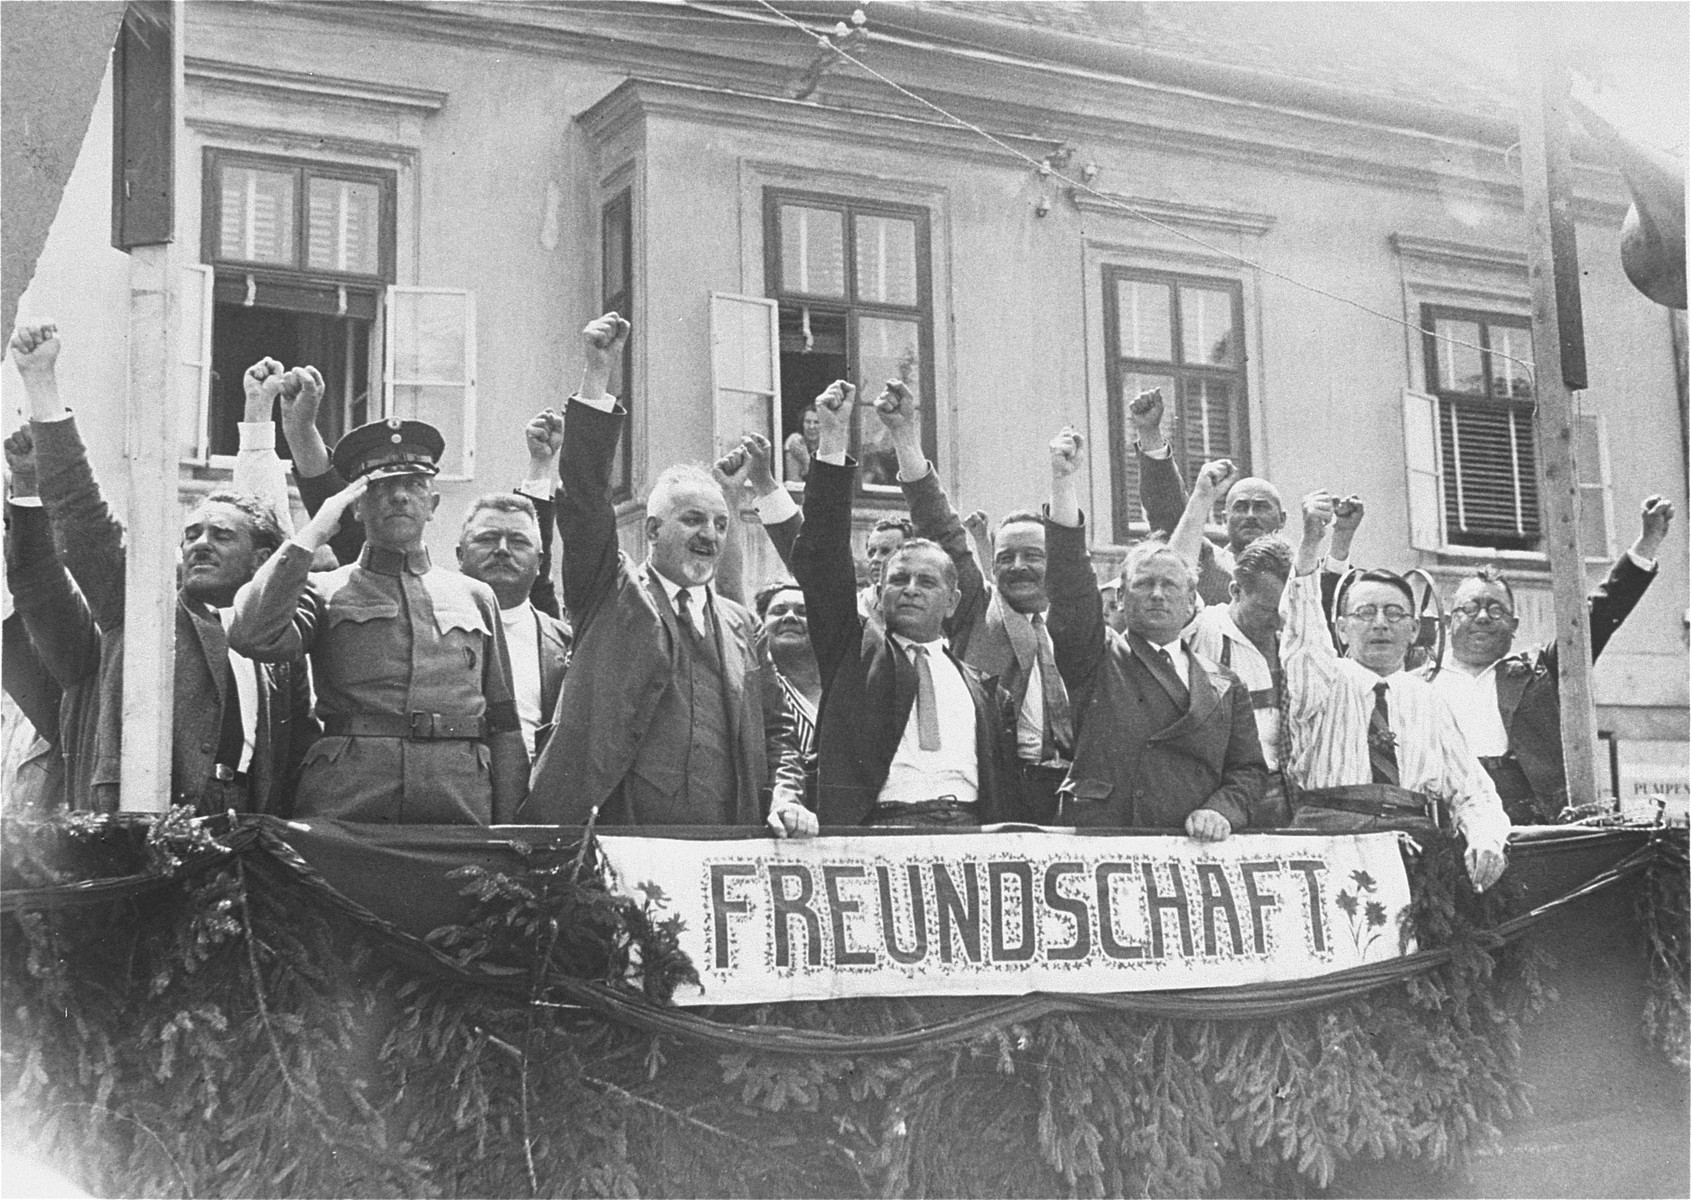 The leader of Austria's Social Democrats salutes the Republican "Schutzbund" during its demonstration against the Nazi storming of the Social-Democratic party house the previous week. 

Pictured from left to right, are Major Eifler, Military Commander of the Republican "Schutzbund"; Speiser, Town Councillor; Otto Bauer, National Deputy; Dr. Deutsch, leader of the Social Democratic Party; and Till, Commander of the "Schutzbund".